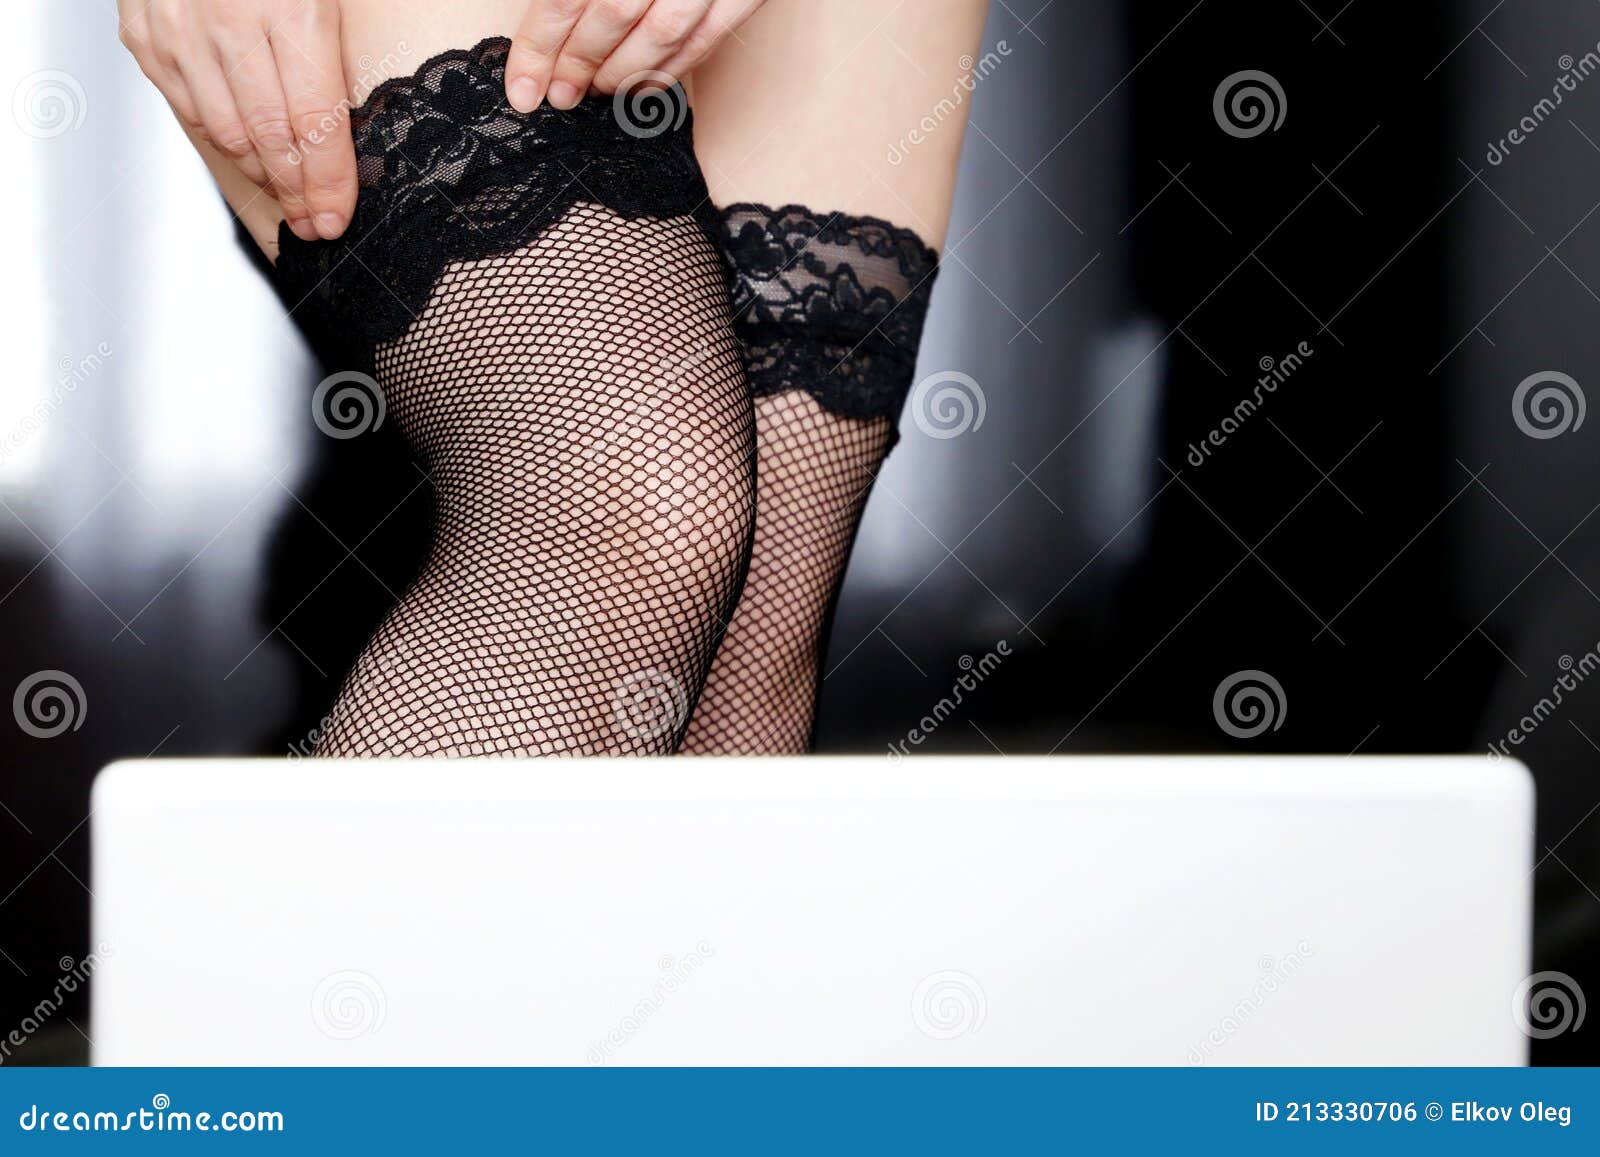 Hot Woman in Black Fishnet Stockings Posing in Front of Laptop Webcam Stock Photo photo